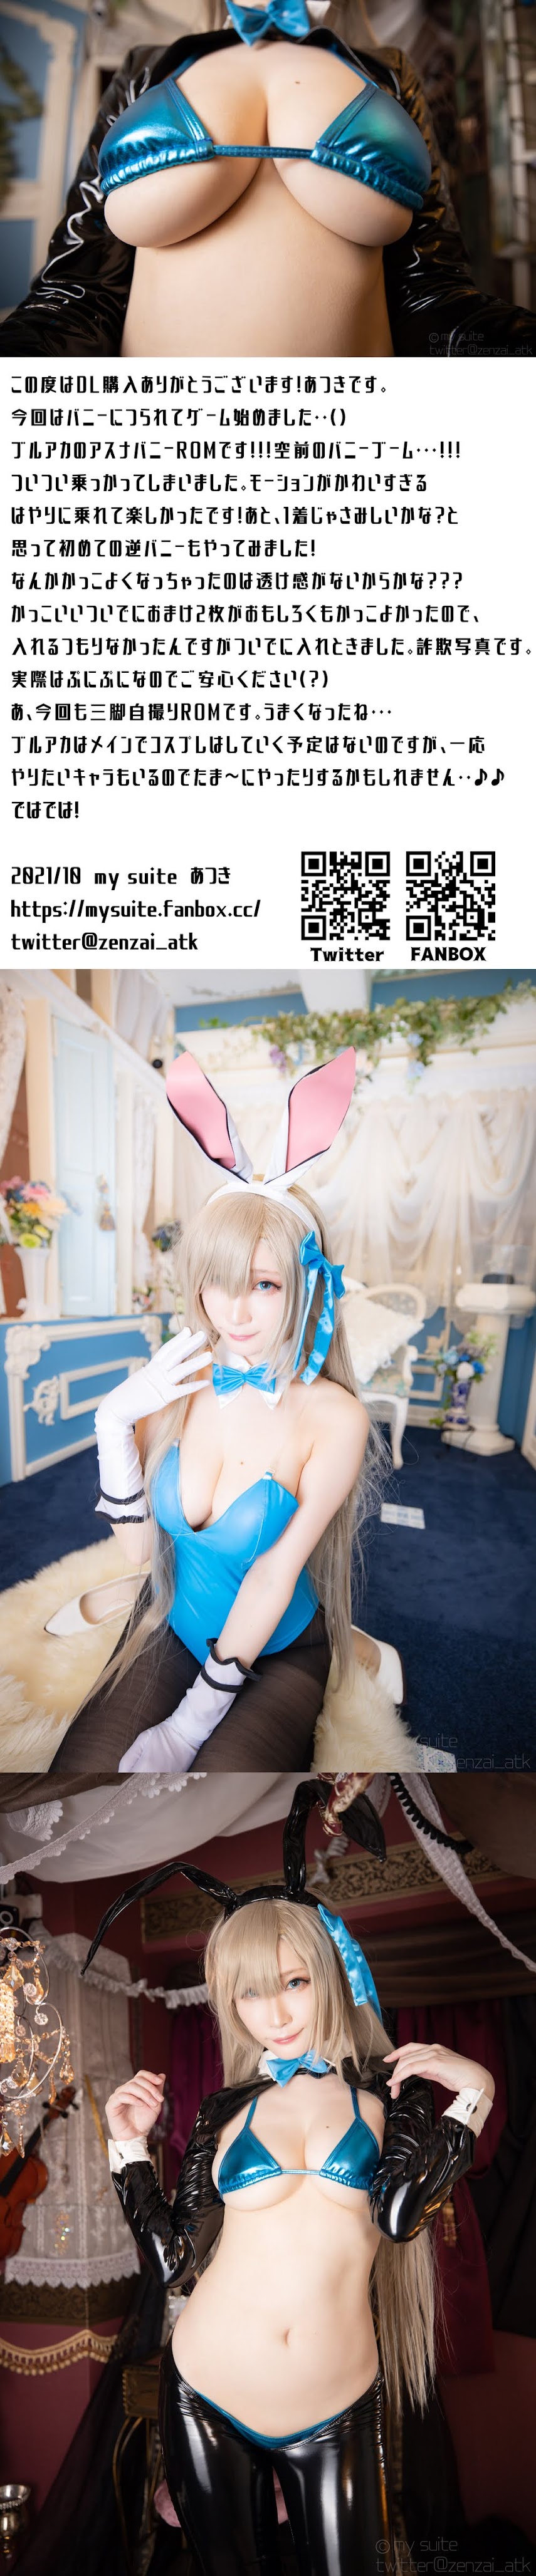 [Cosplay] [my suite] Atsuki あつき - Bunny Surprise (Blue Archive) [190P268MB]   P214571